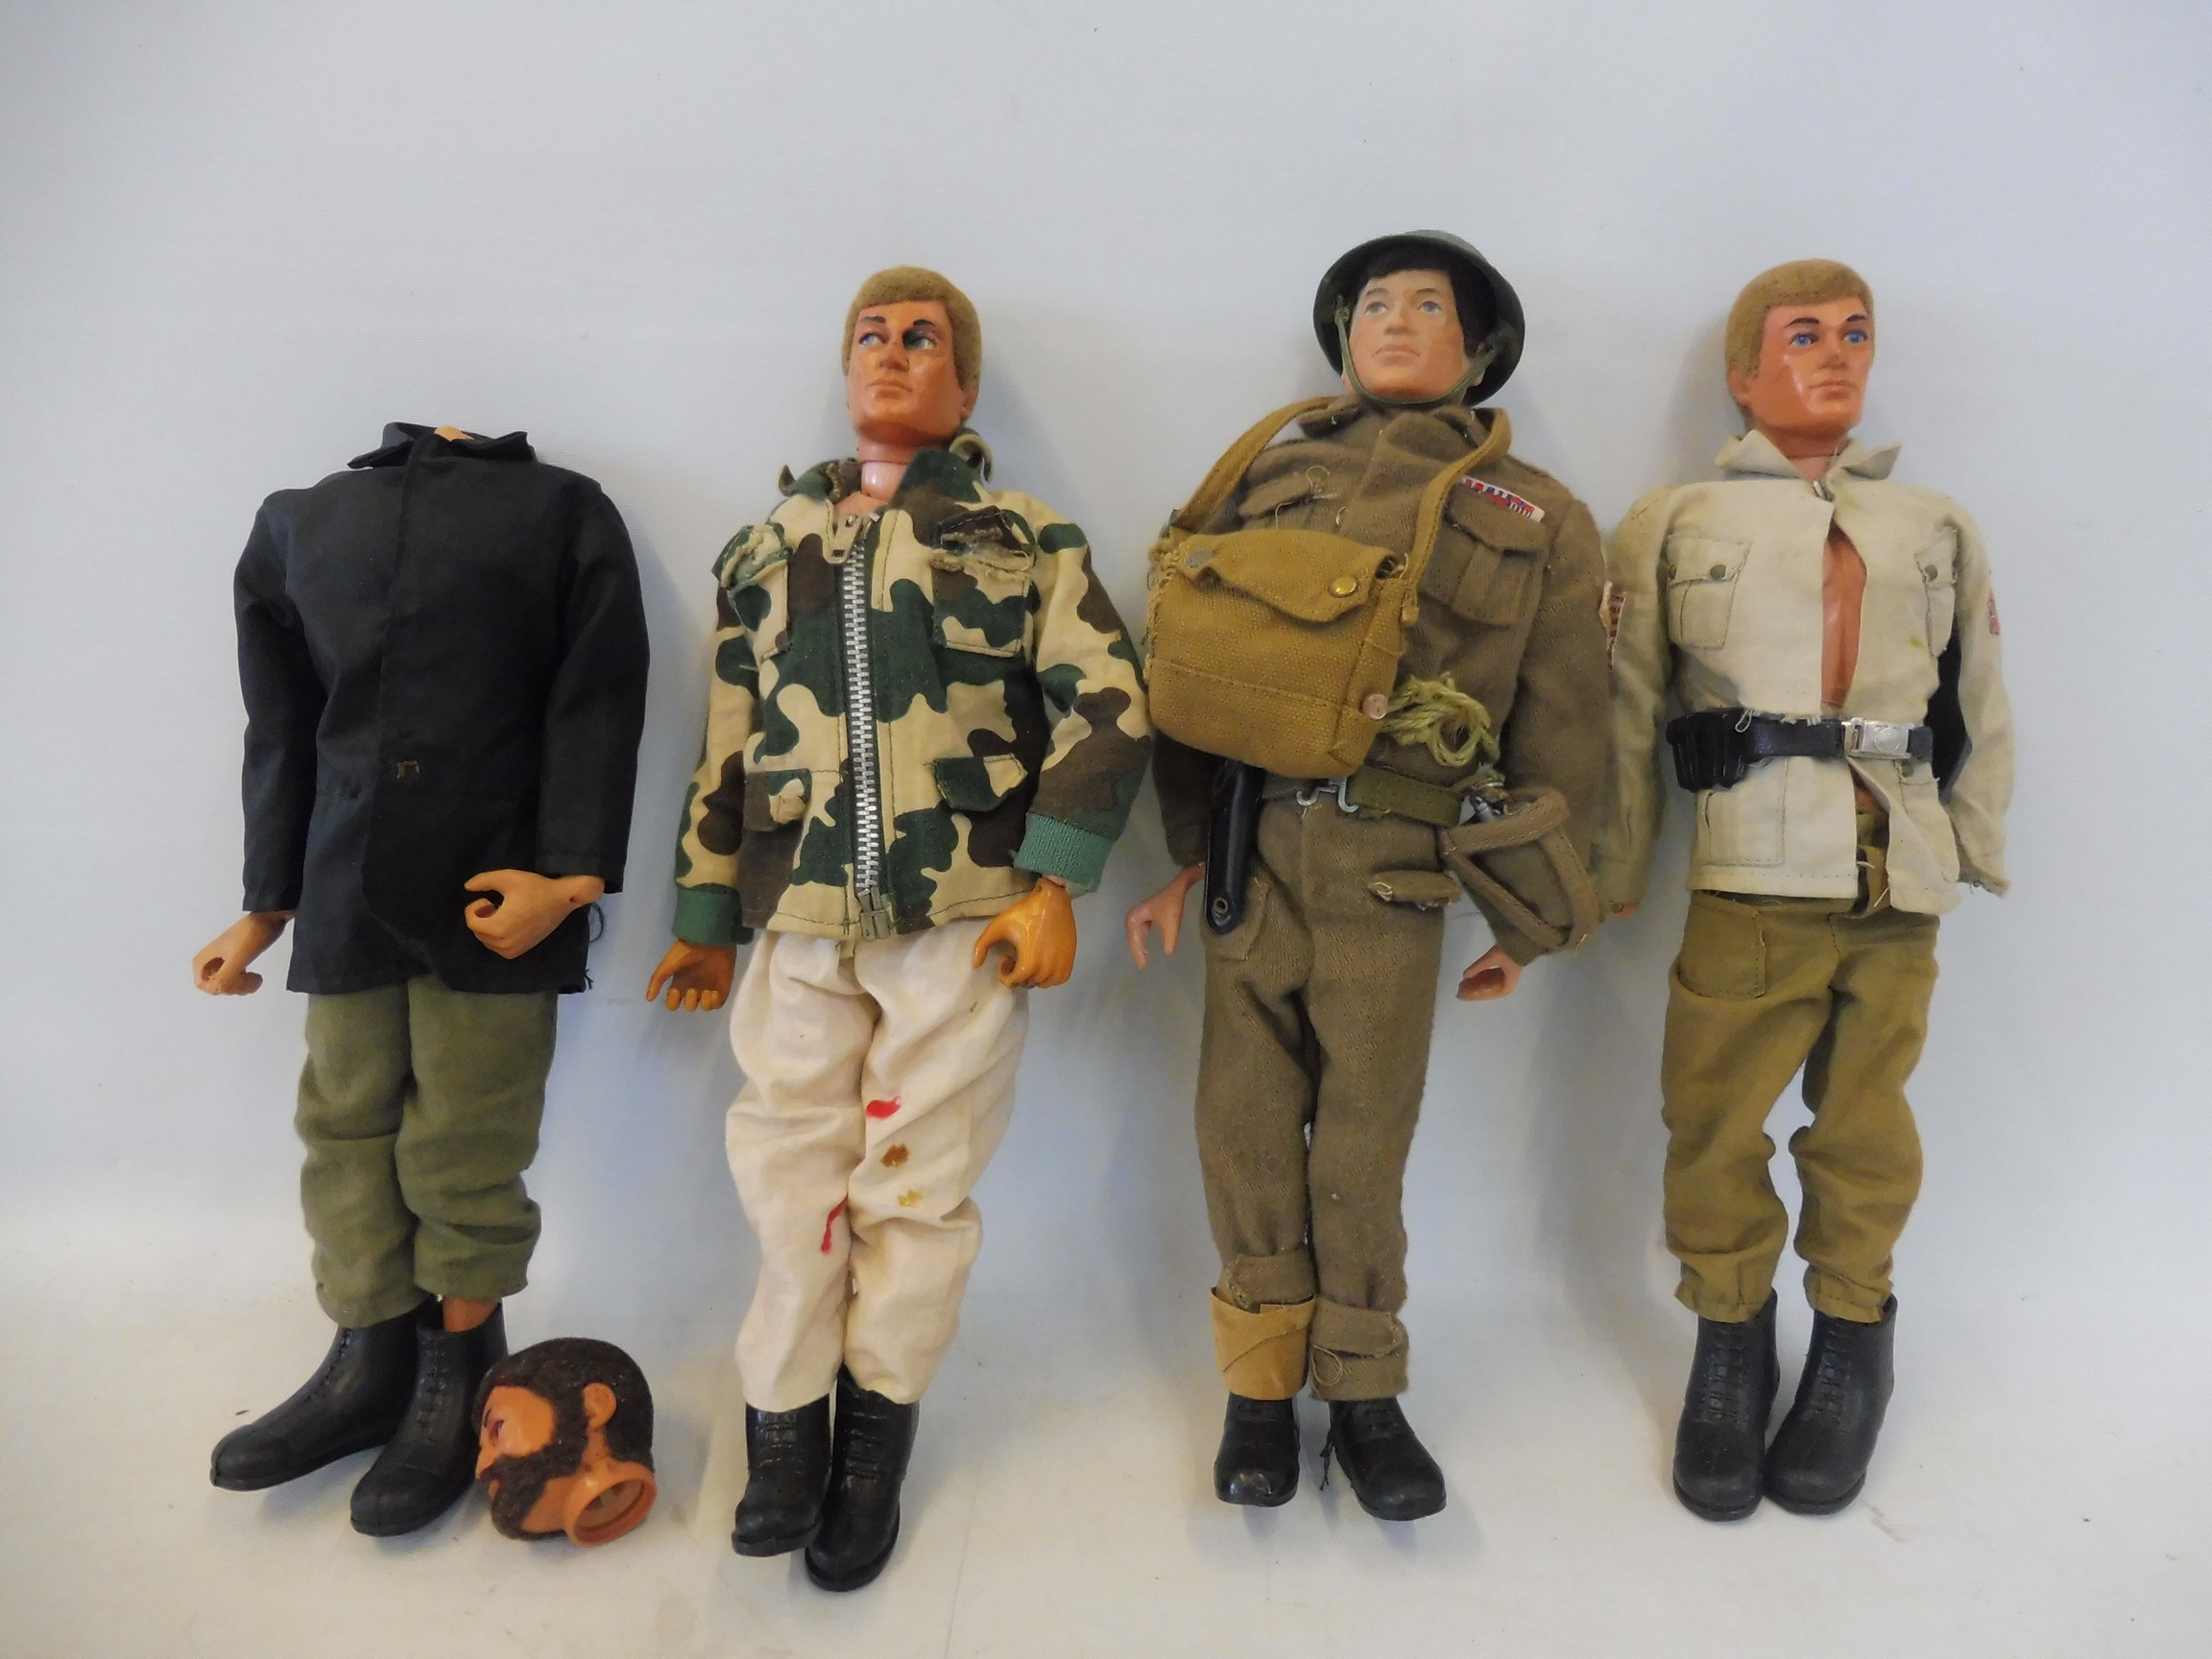 Four Action Man figures, circa 1970s, one in a complete British WWII uniform.